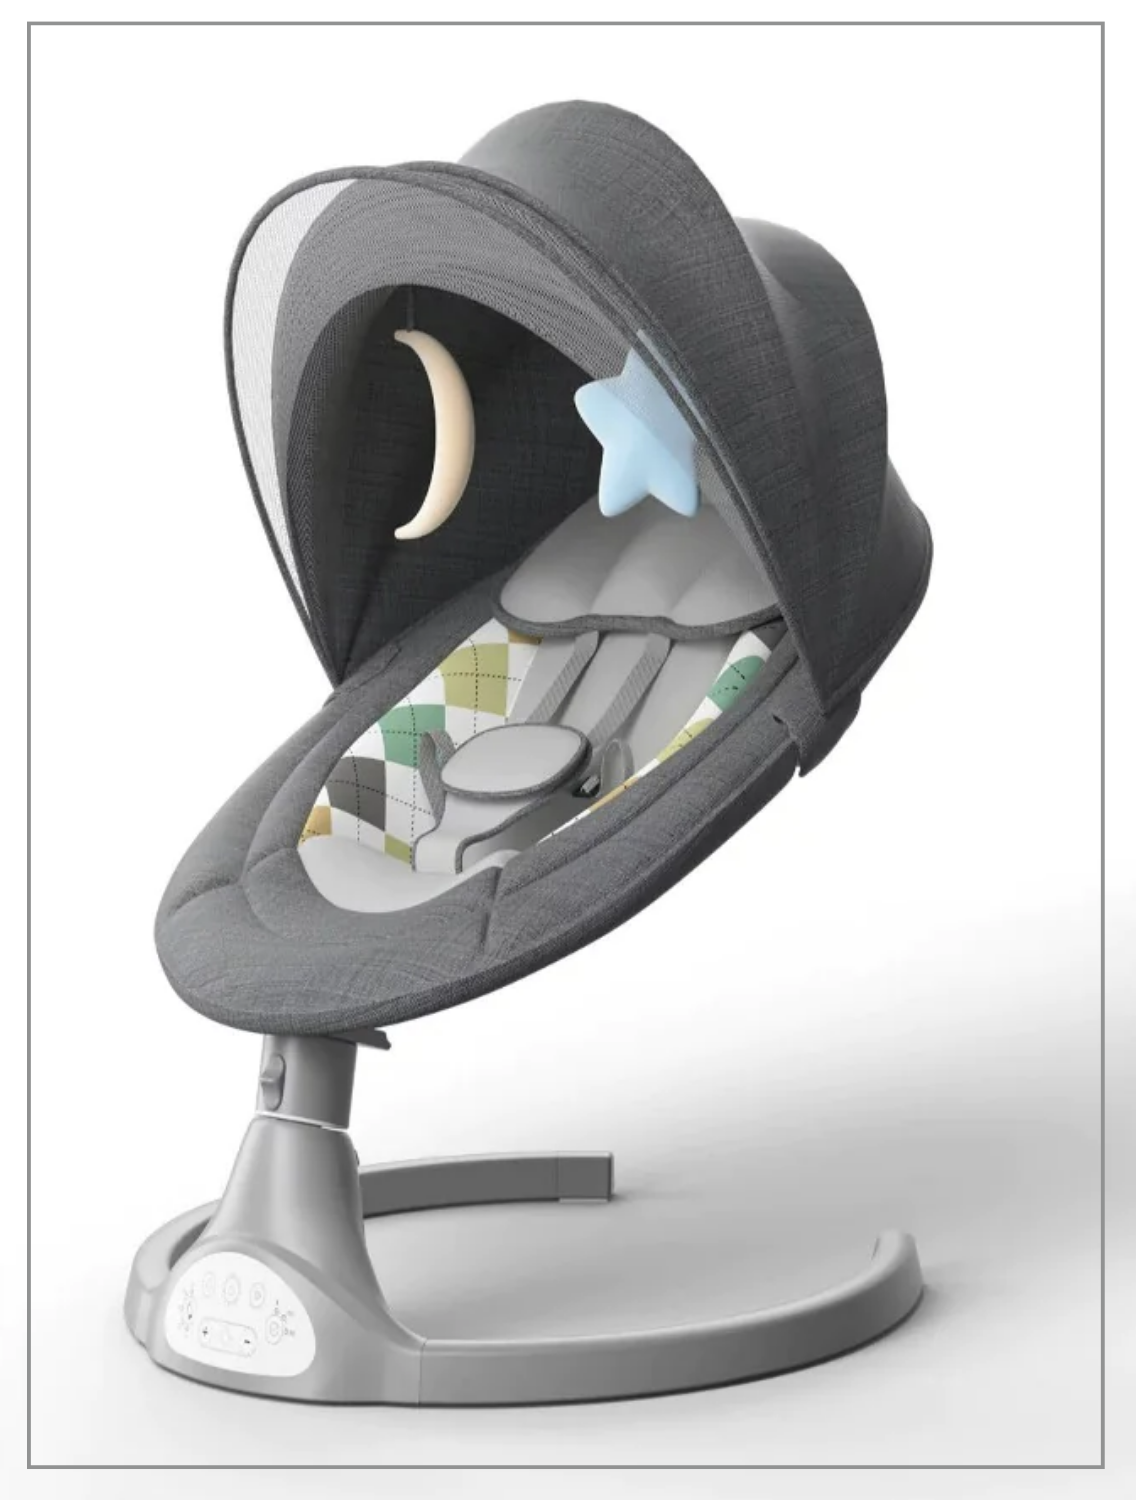 Electric Baby Bouncer Rocker Vibration Chair Portable Musical Cradle Swing  Seat